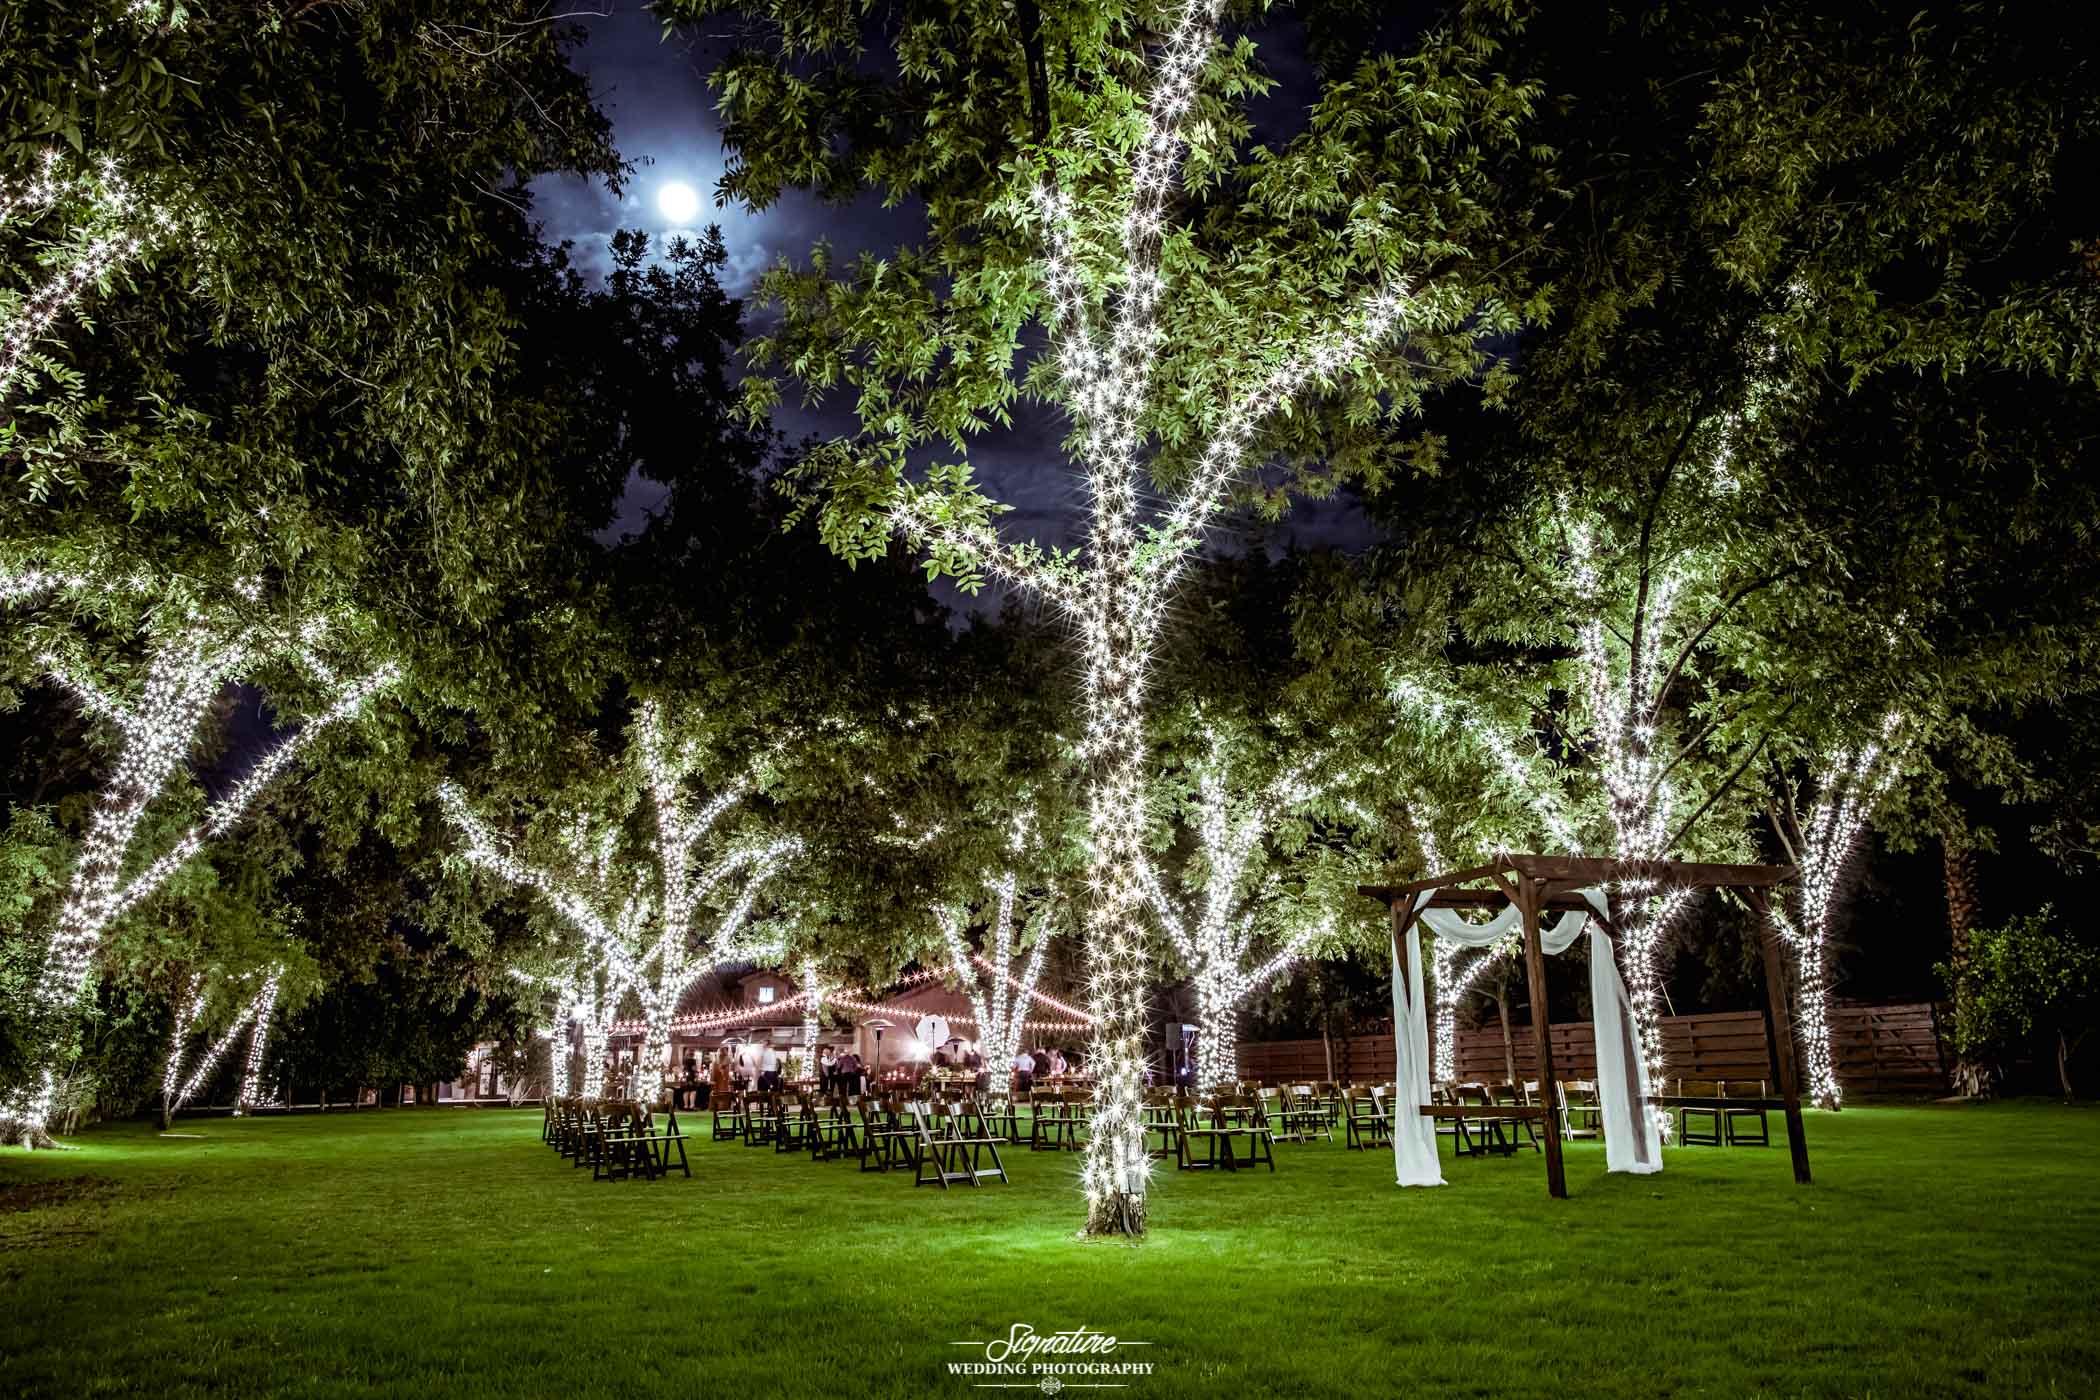 Trees with lights at outdoor wedding venue